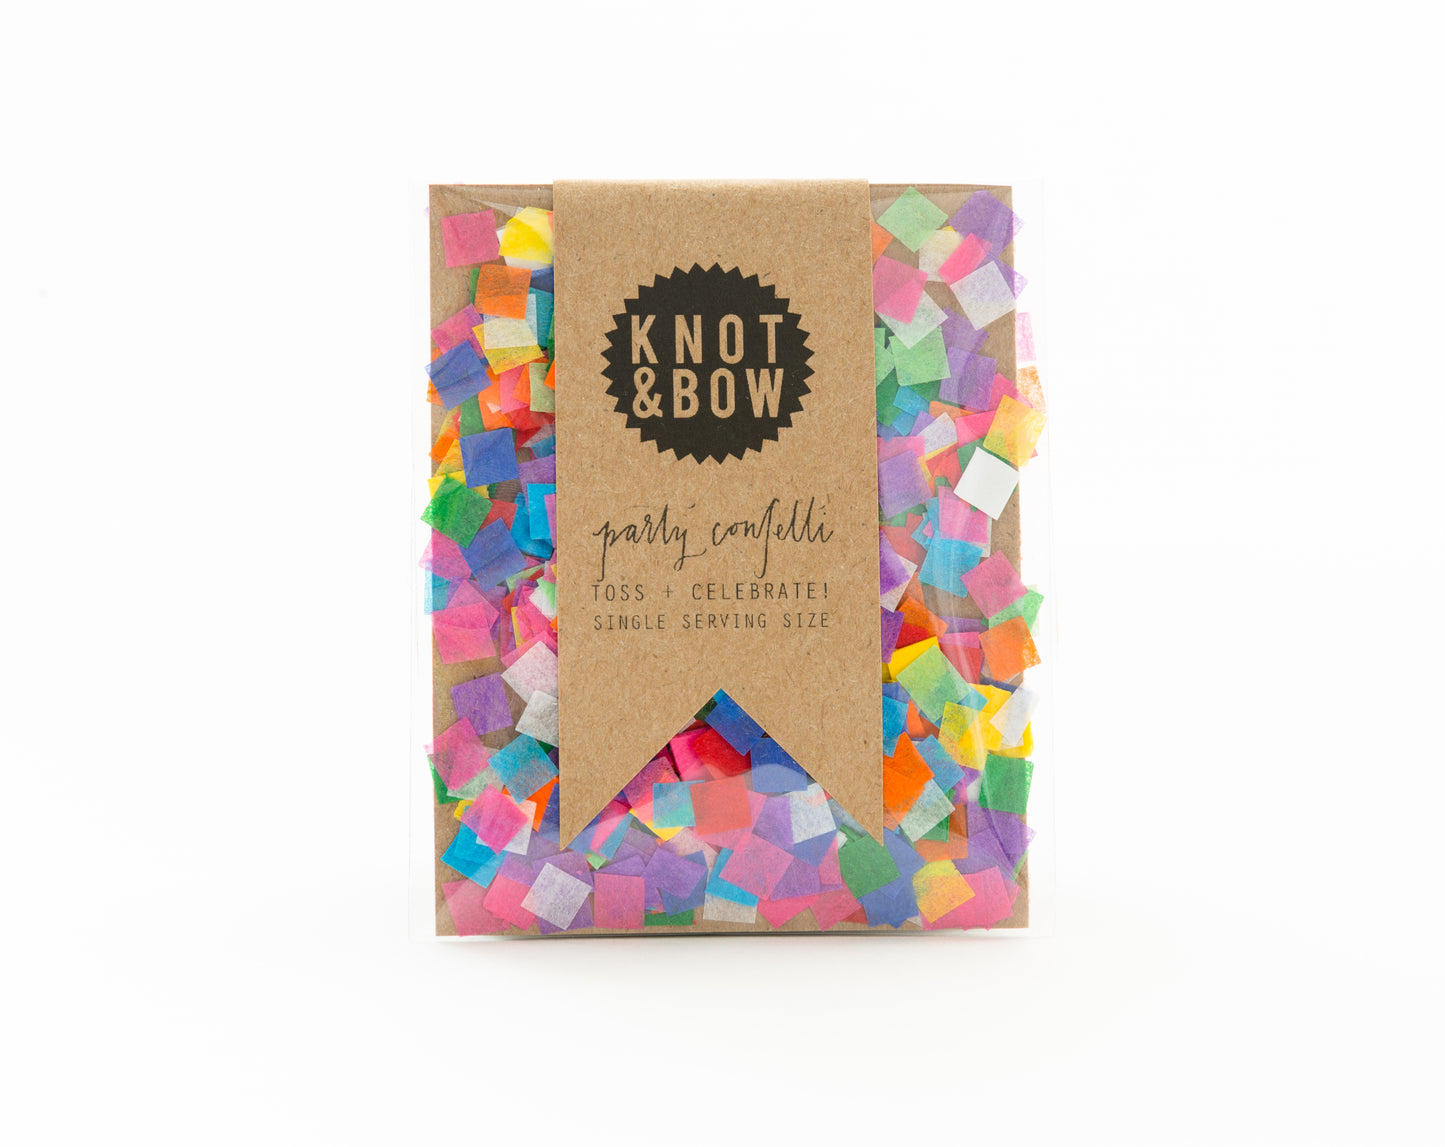 Single Serving Size Tiny Rainbow Confetti by Knot & Bow